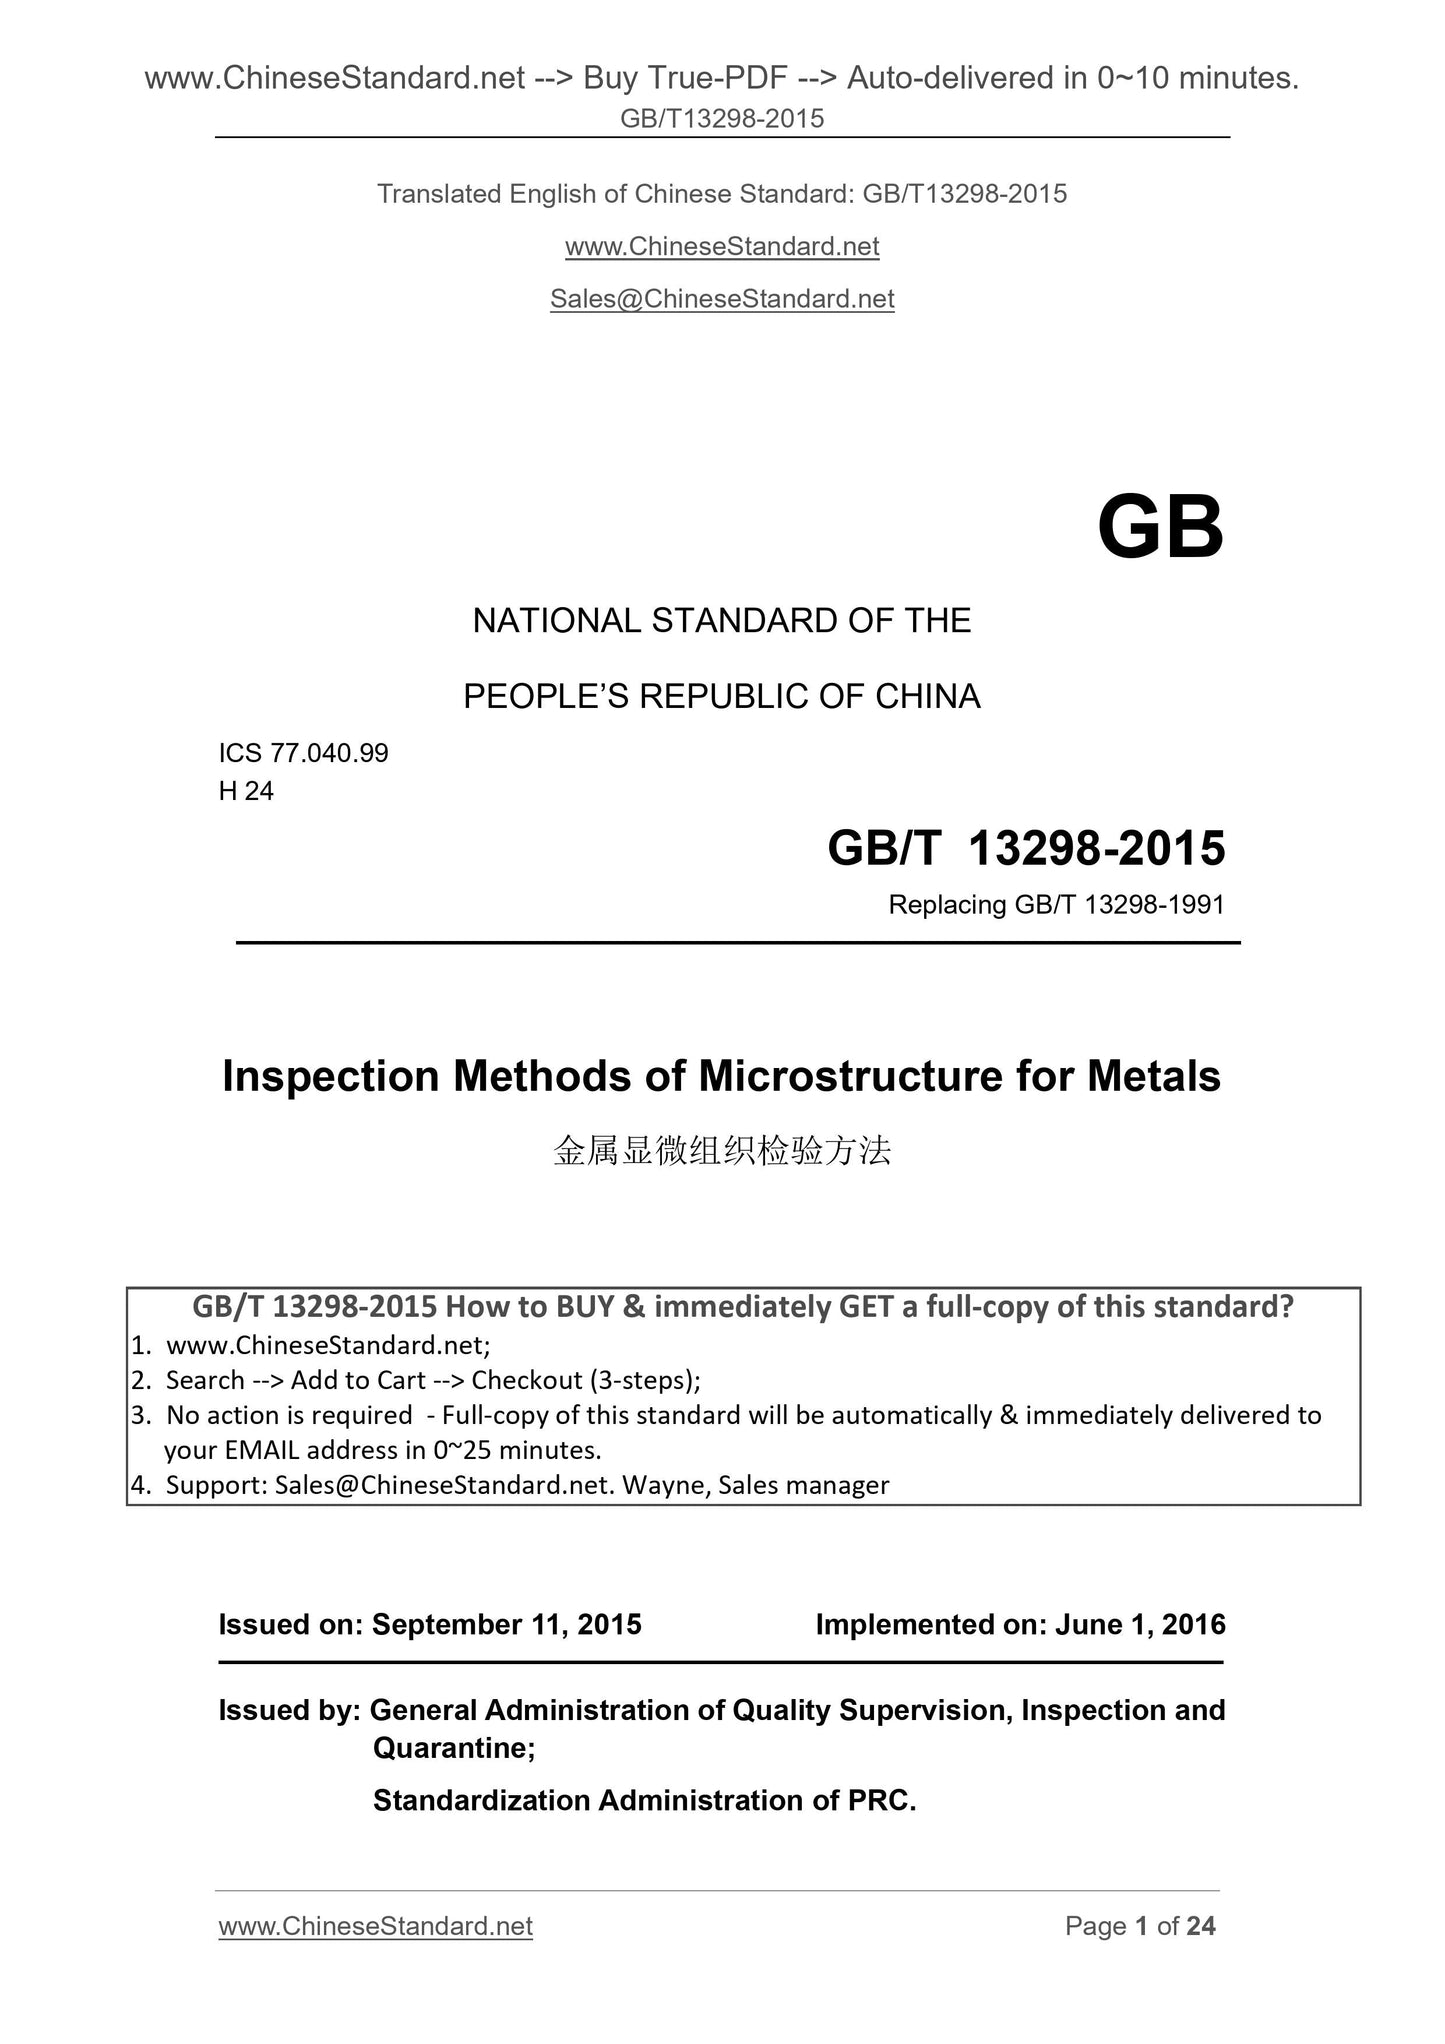 GB/T 13298-2015 Page 1